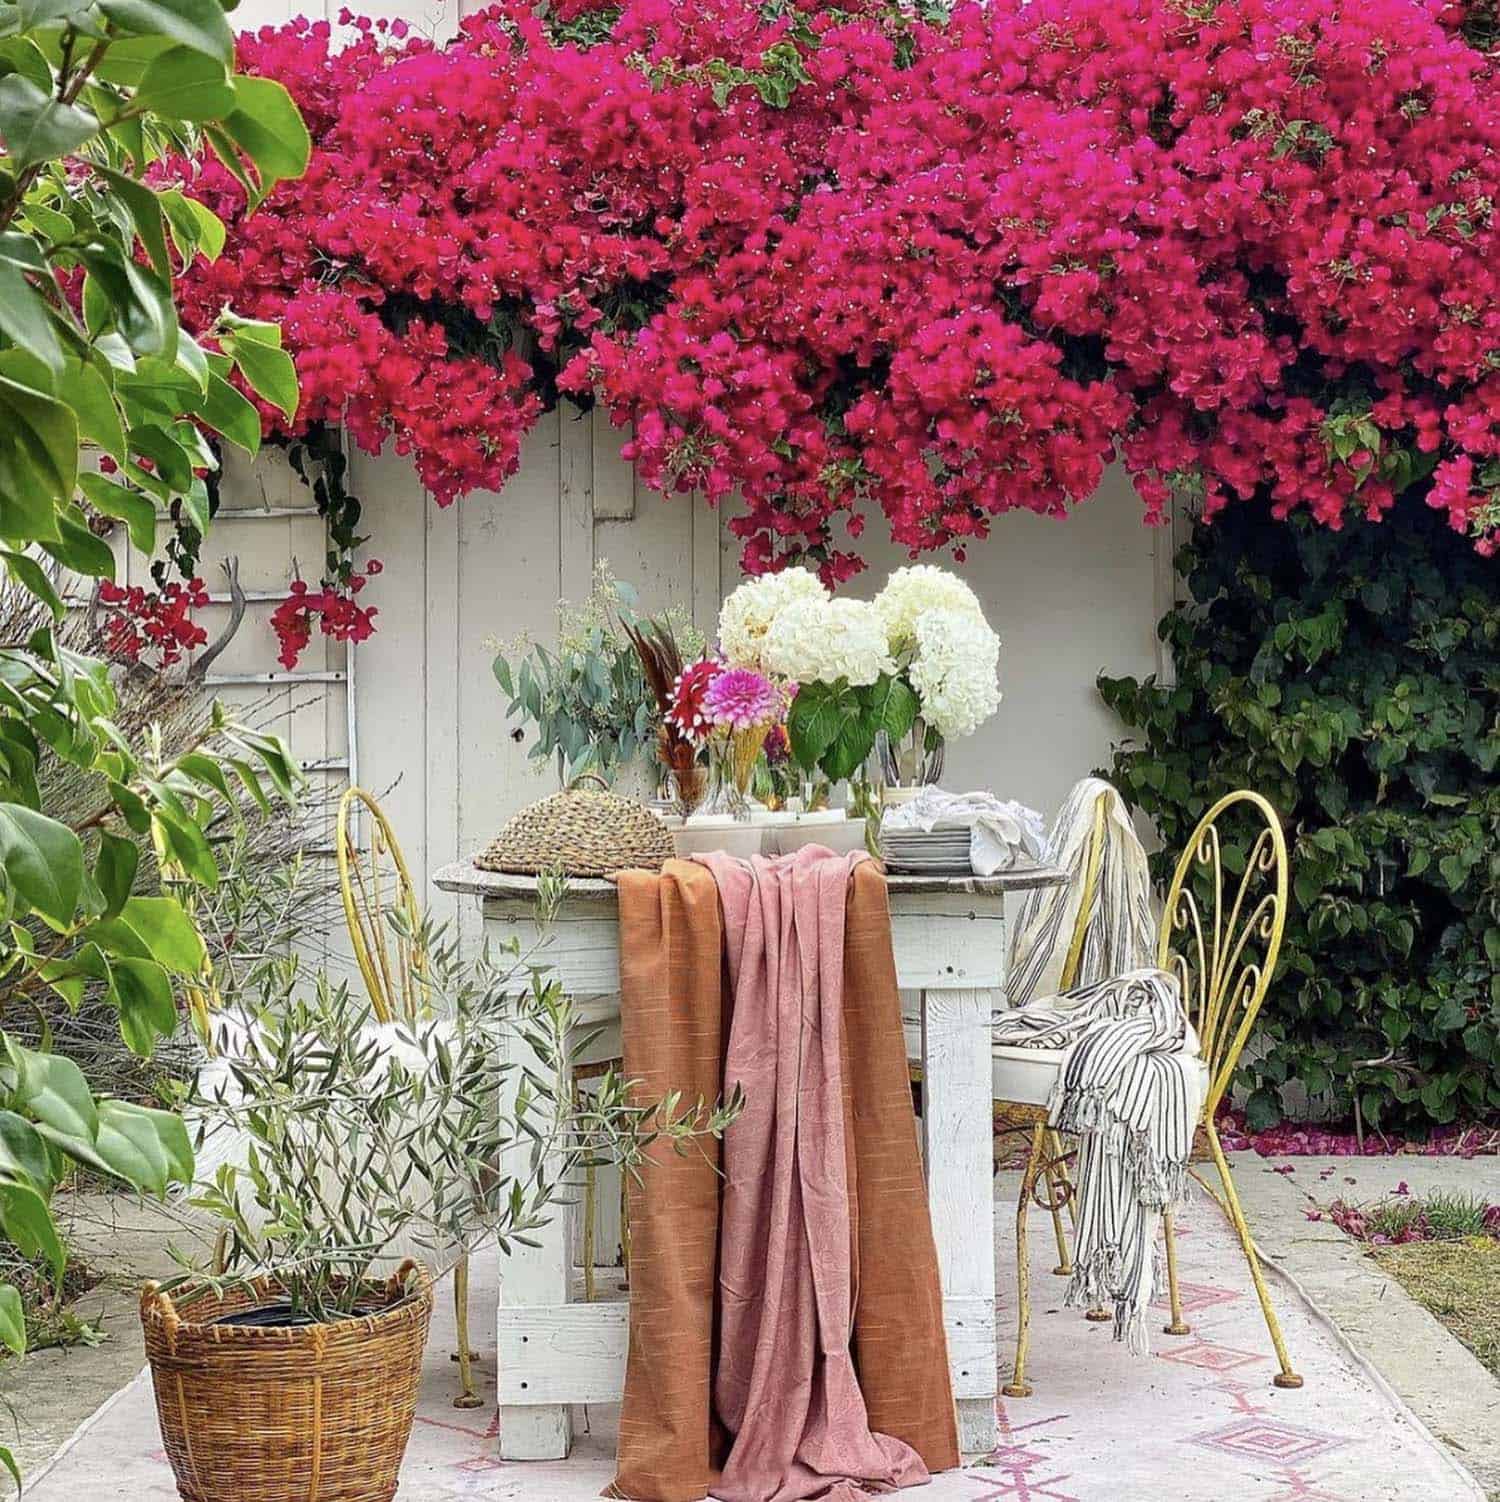 alfresco dining with a bougainvillea backdrop